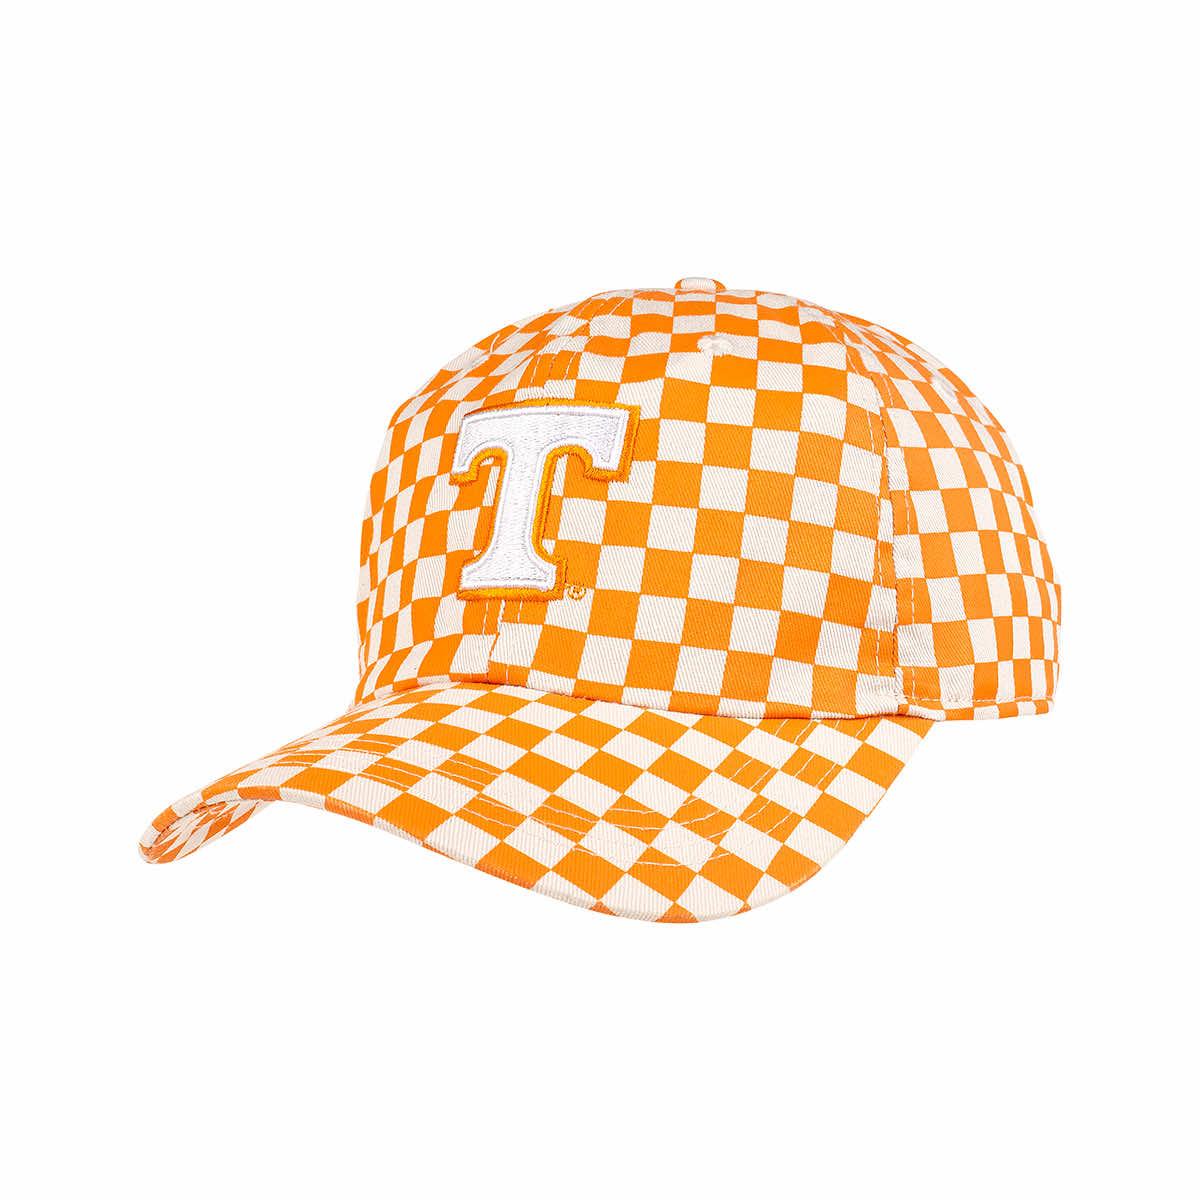 University of Tennessee Vintage Twill Checkered Cap